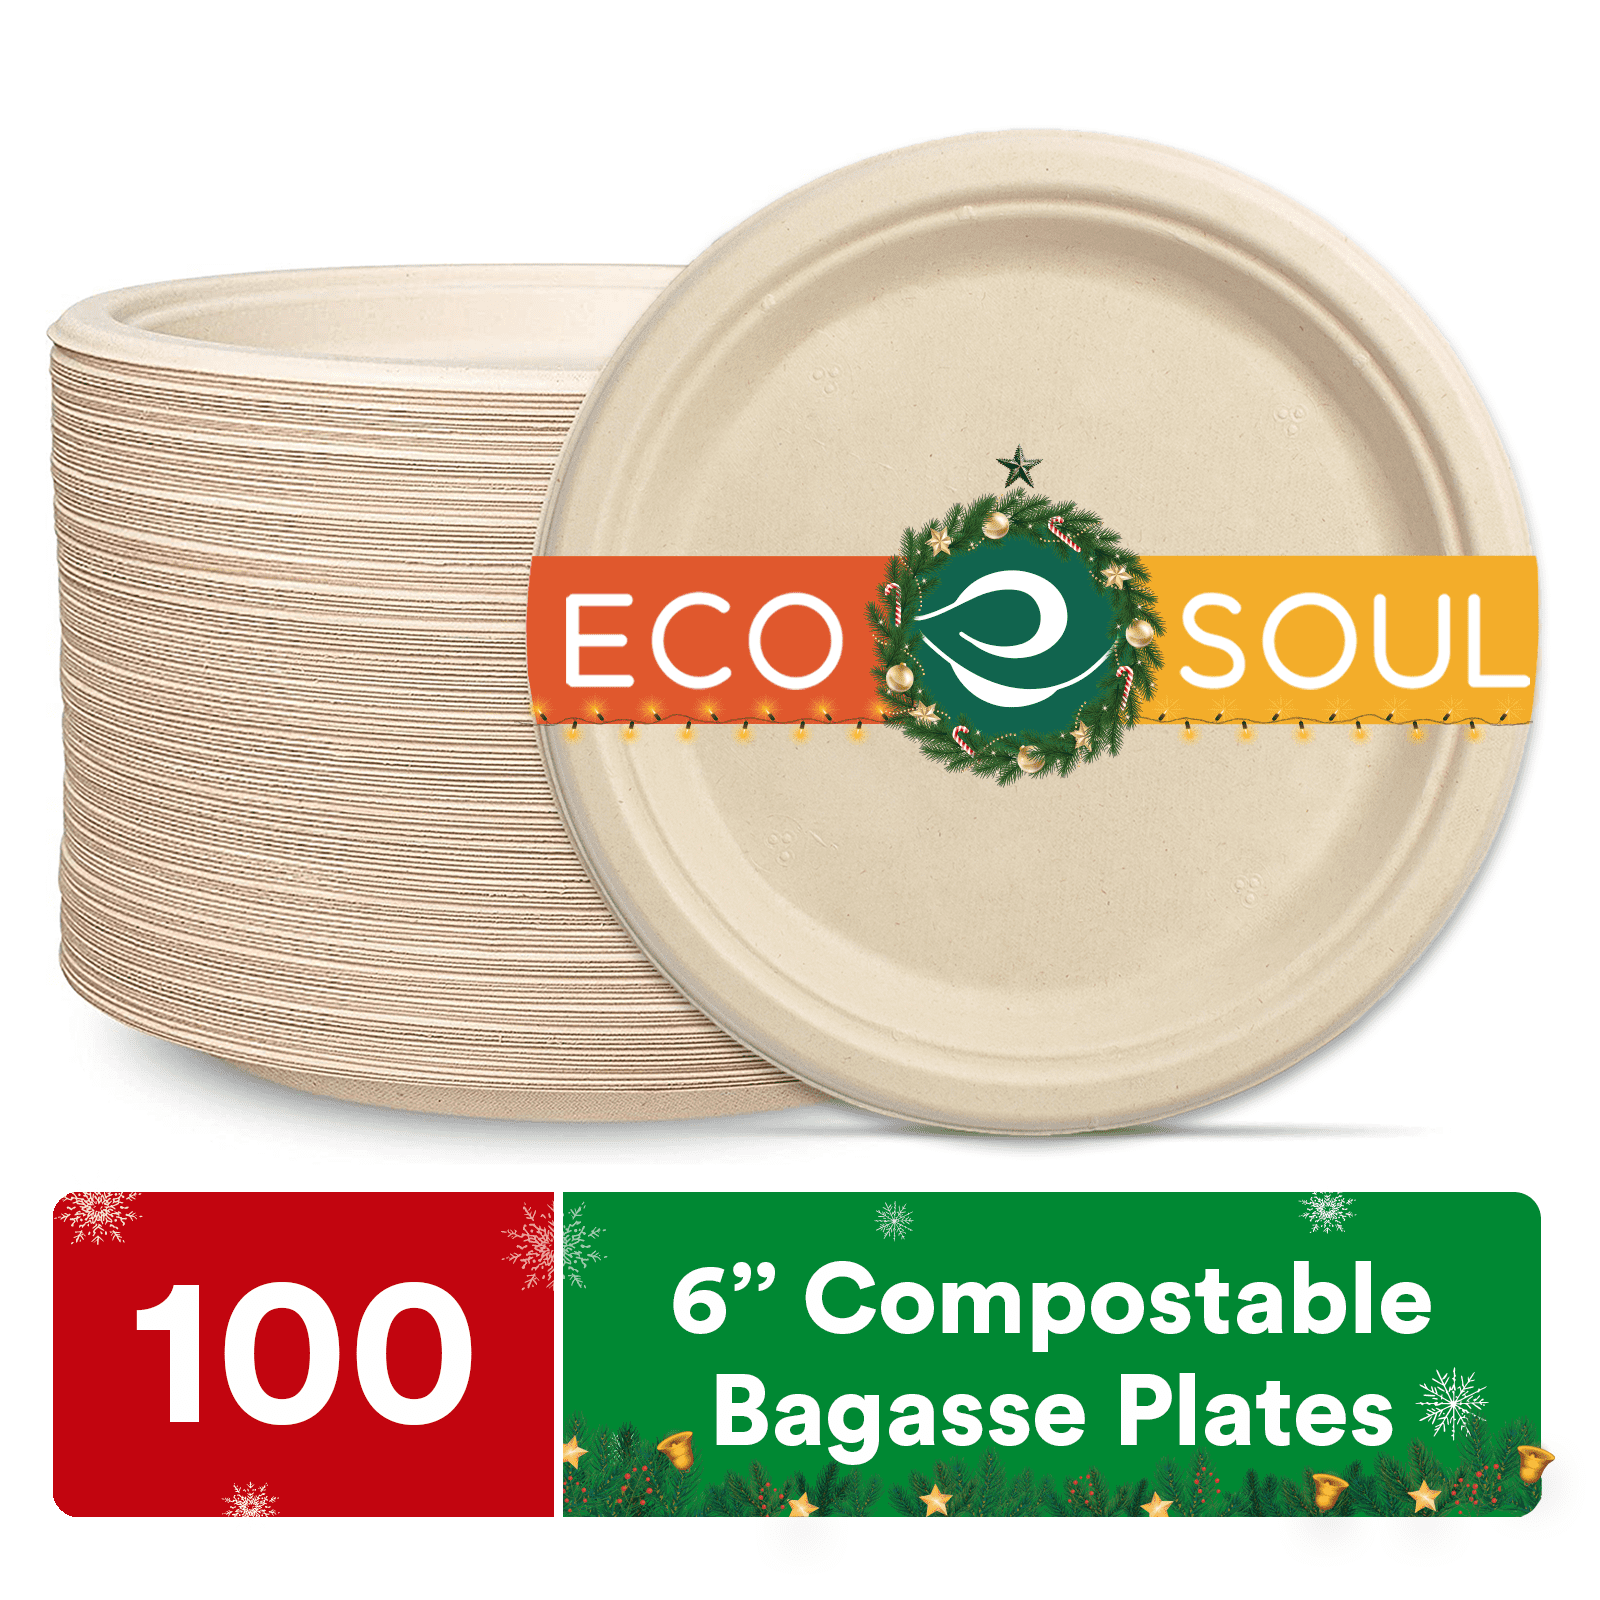 Vplus 100% Compostable Oval Paper Plates 12 inch 125 Pack Super Strong Disposable  Paper Plates Bagasse Natural Biodegradable Eco-Friendly Sugarcane Plates  for BBQ, Party, Gathering, and Picnic